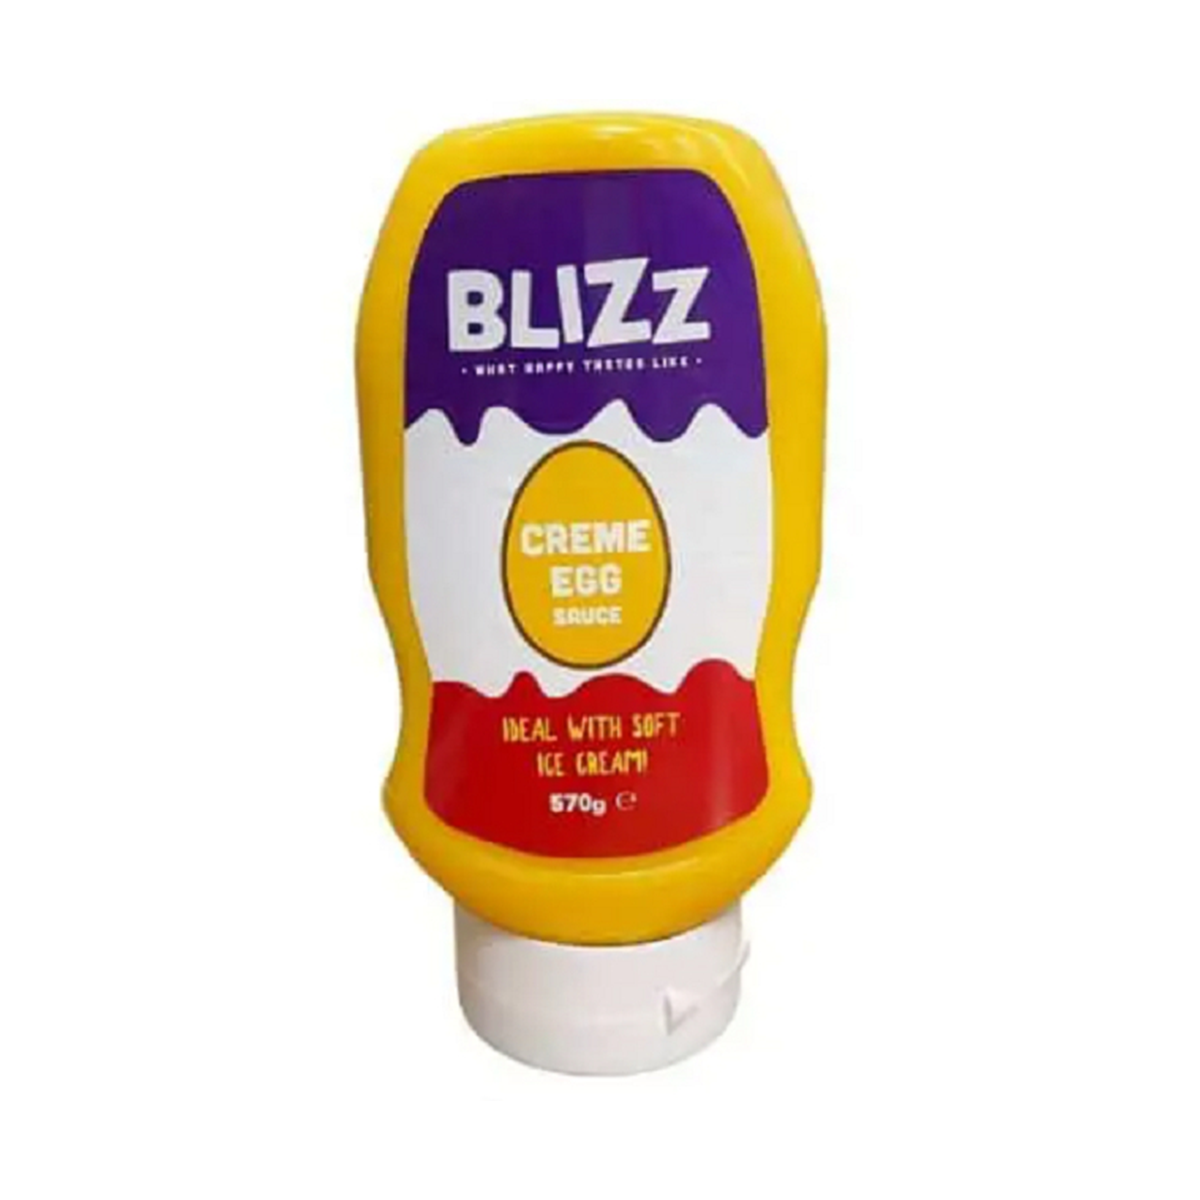 Blizz Crème Egg Topping Syrup